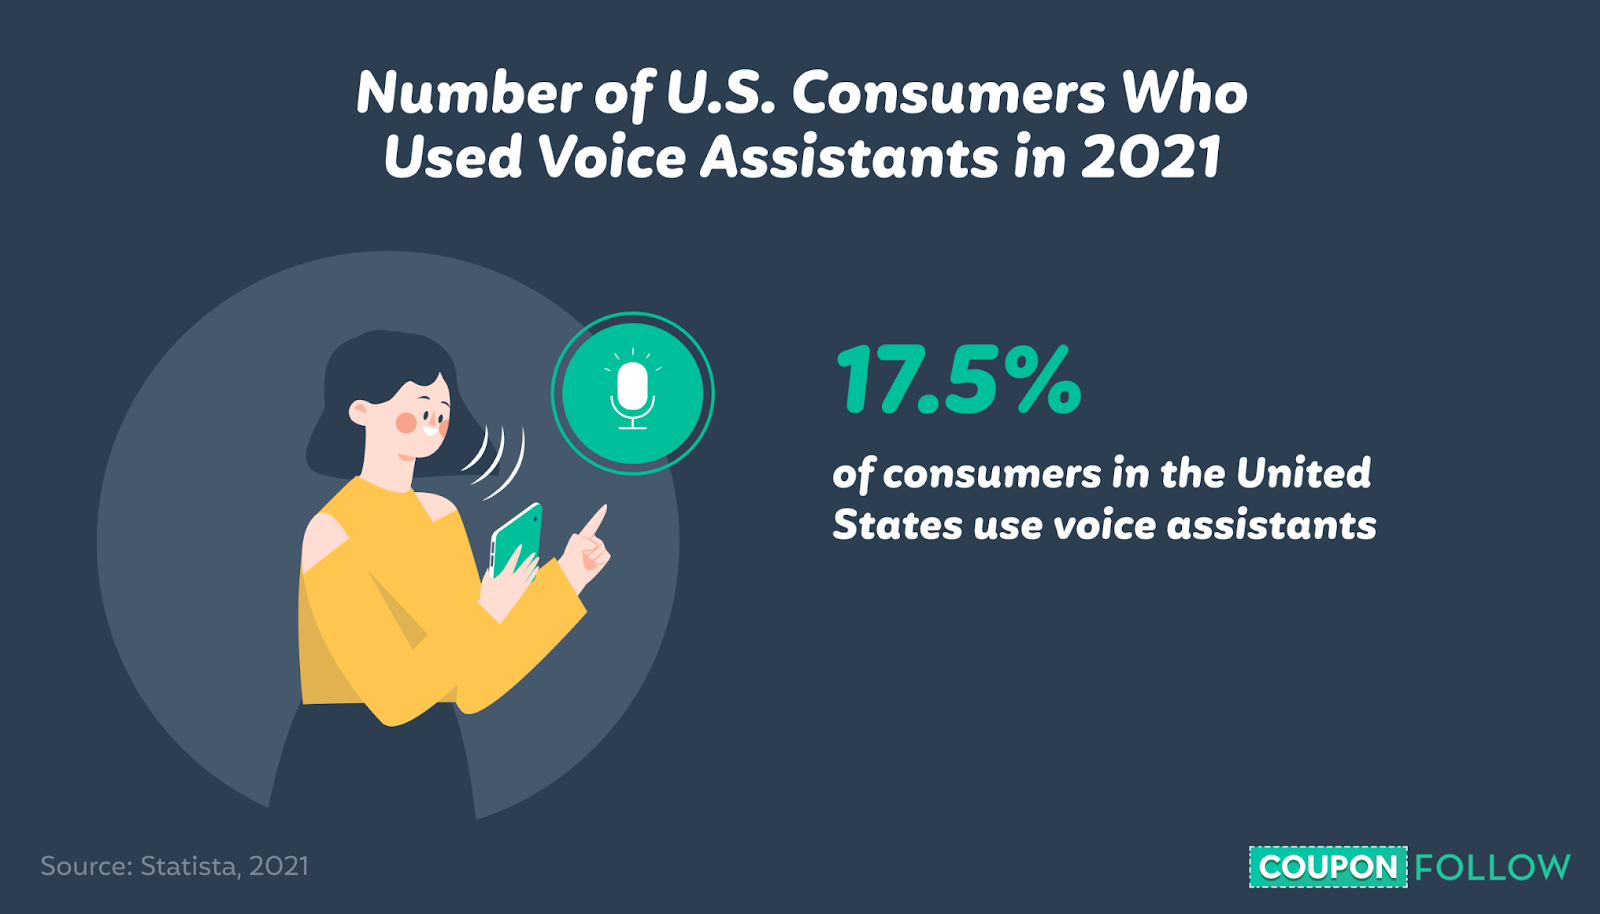 Illustration showing the amount of U.S. consumers who use voice assistants